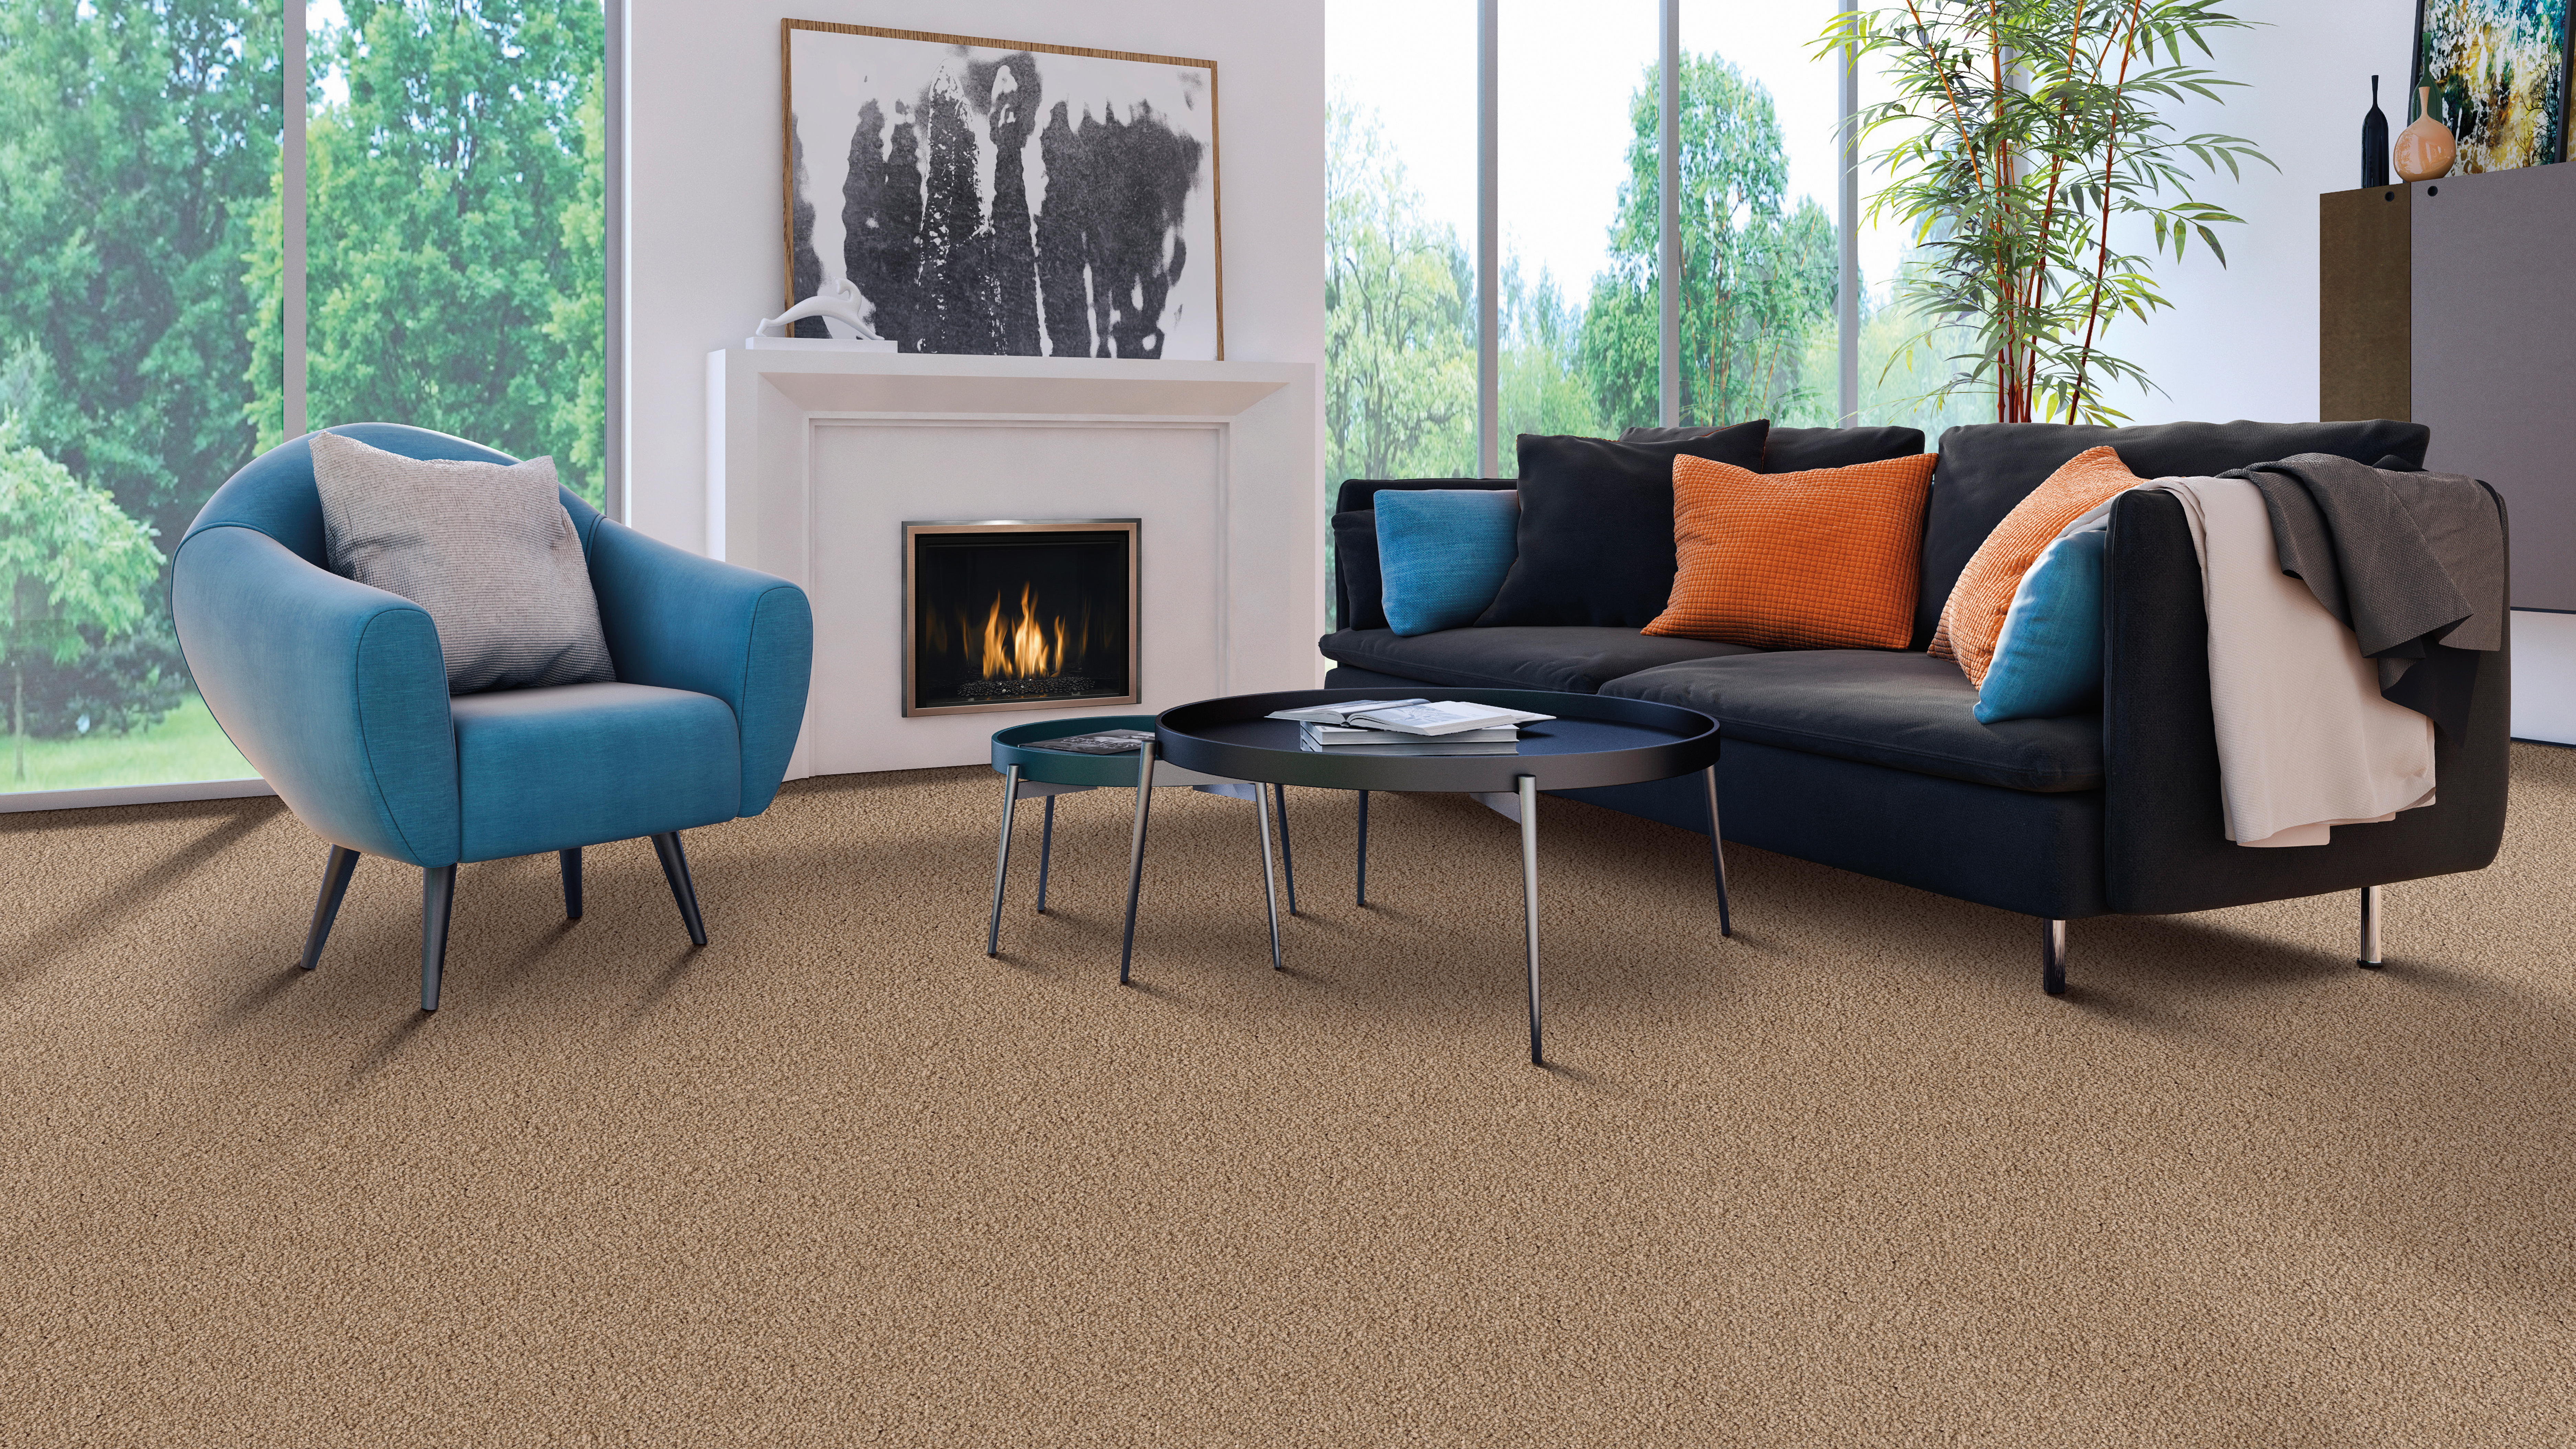 Carpet flooring in a living room, installation services available.